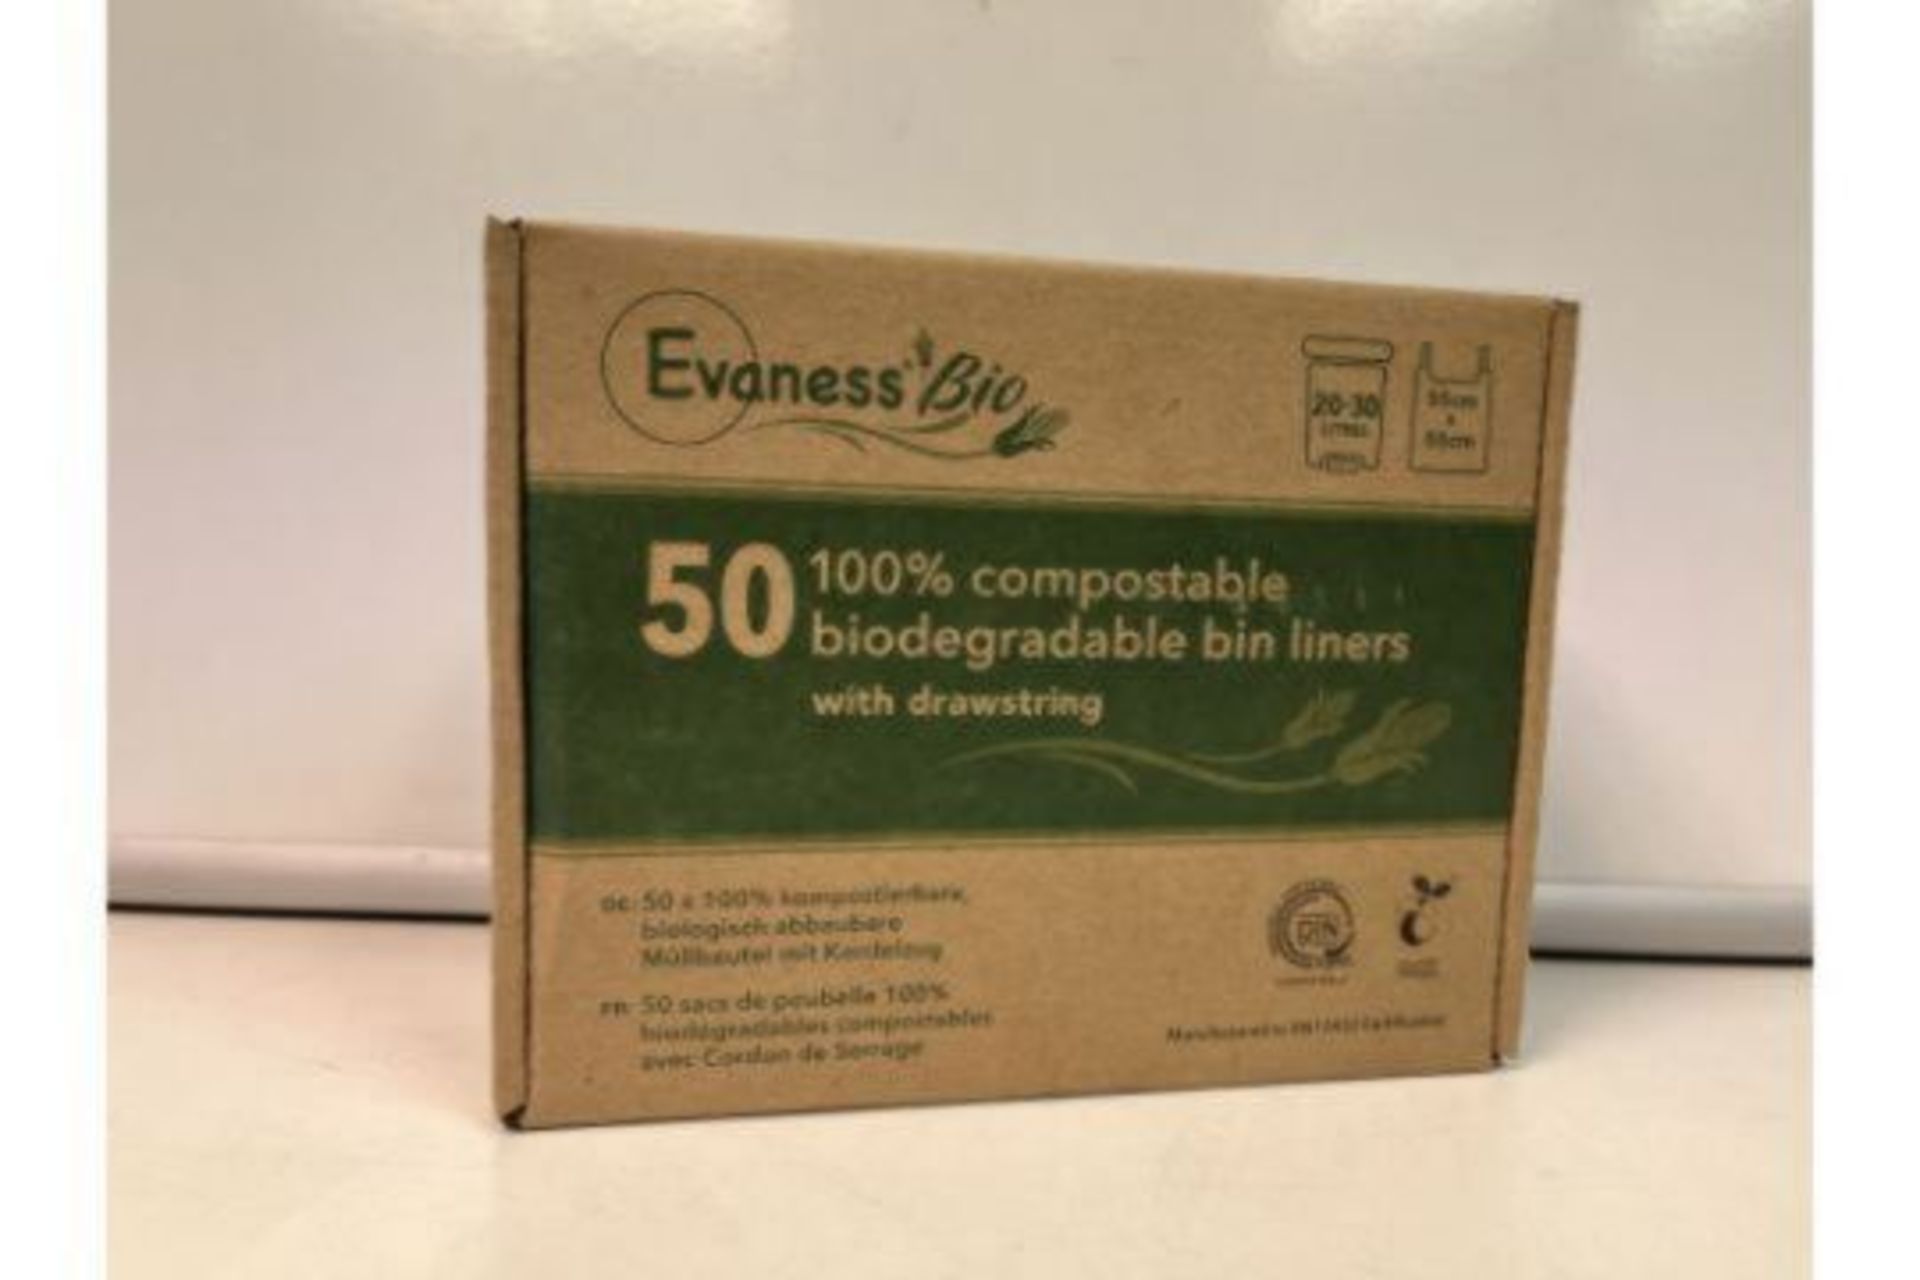 20 X NEW BOXES OF 50 EVANESS BIO 100% COMPOSTABLE BIODEGRADABLE BIN LINERS WITH DRAWSTRING. 20-